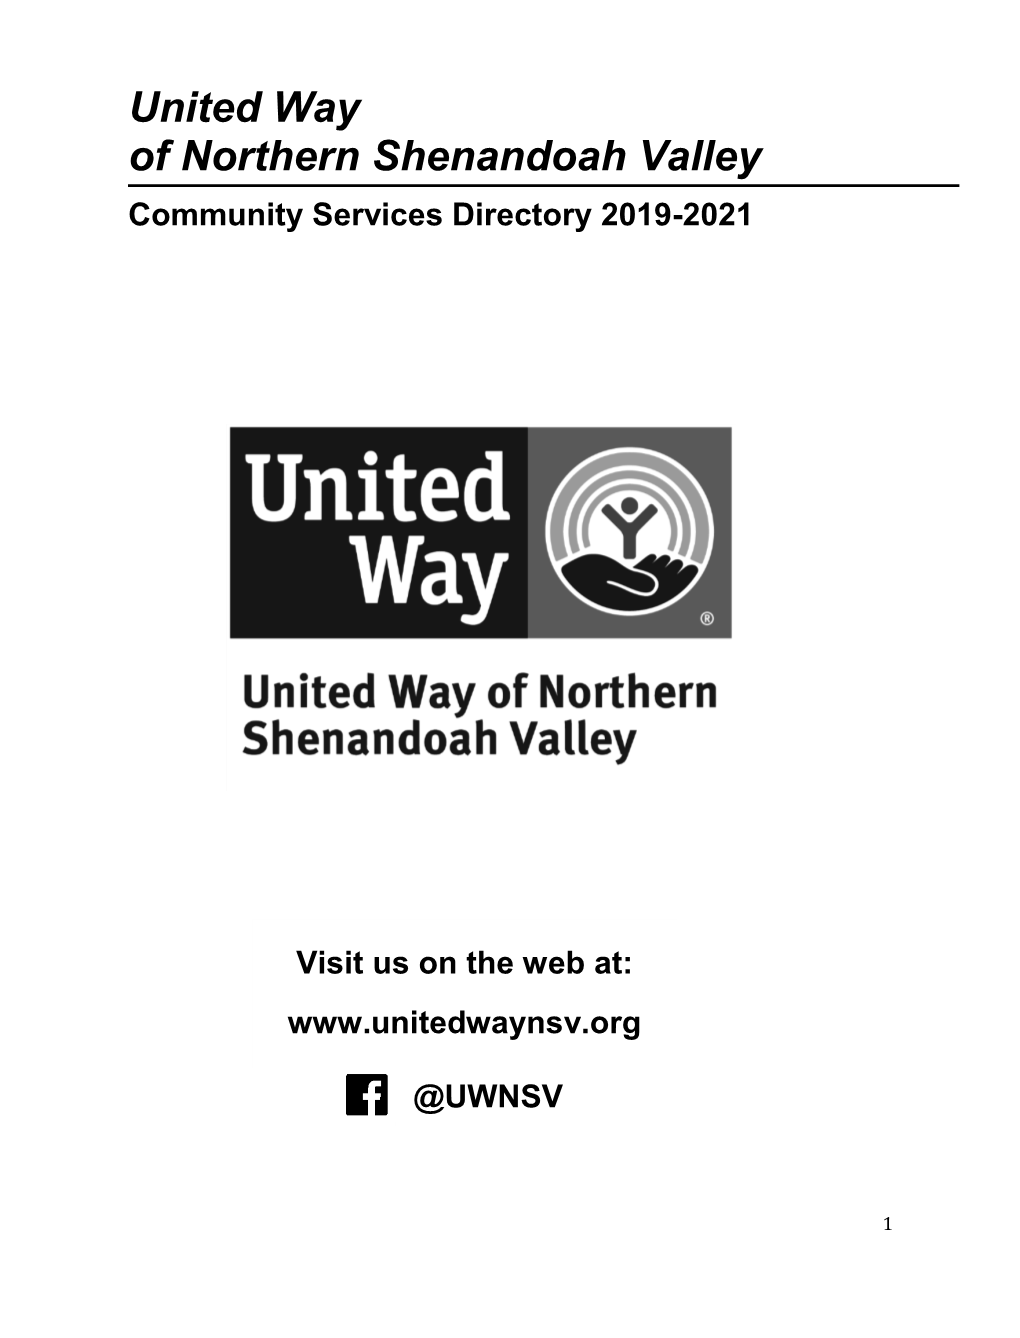 2019-2021 Community Services Directory